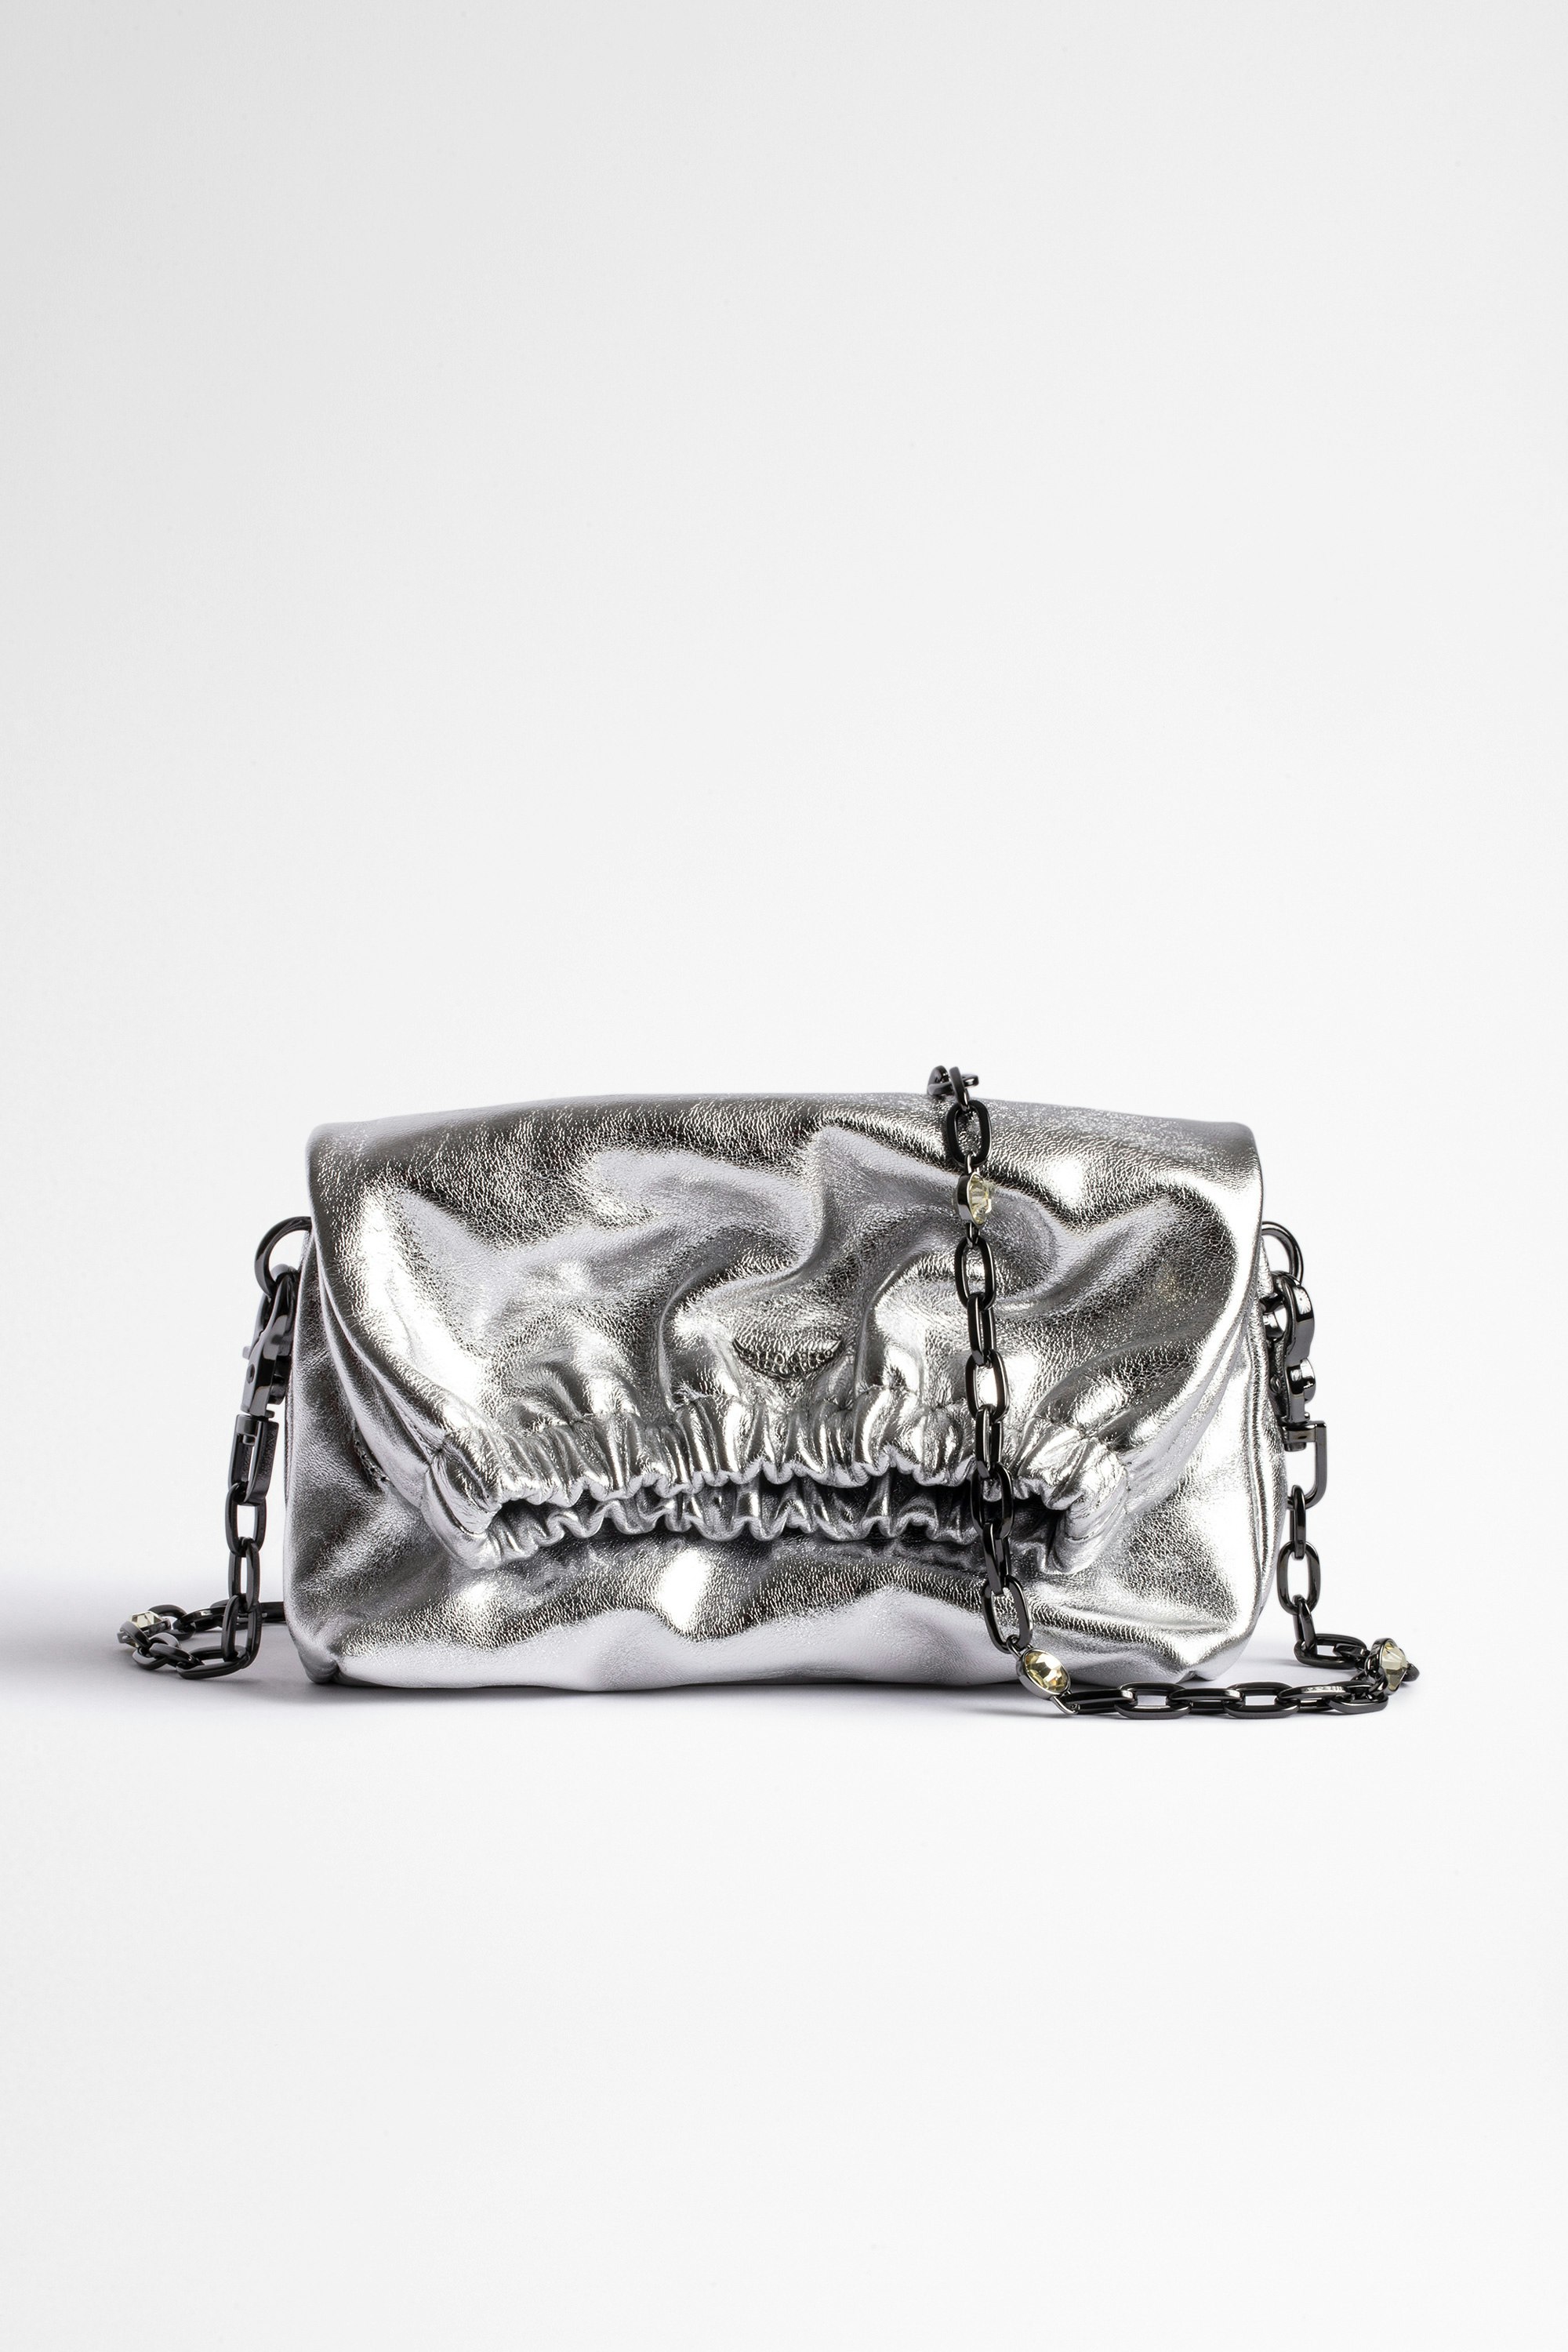 Rockyssime XS Metallic Bag Women's lambskin leather clutch bag in silver with silver chain handle